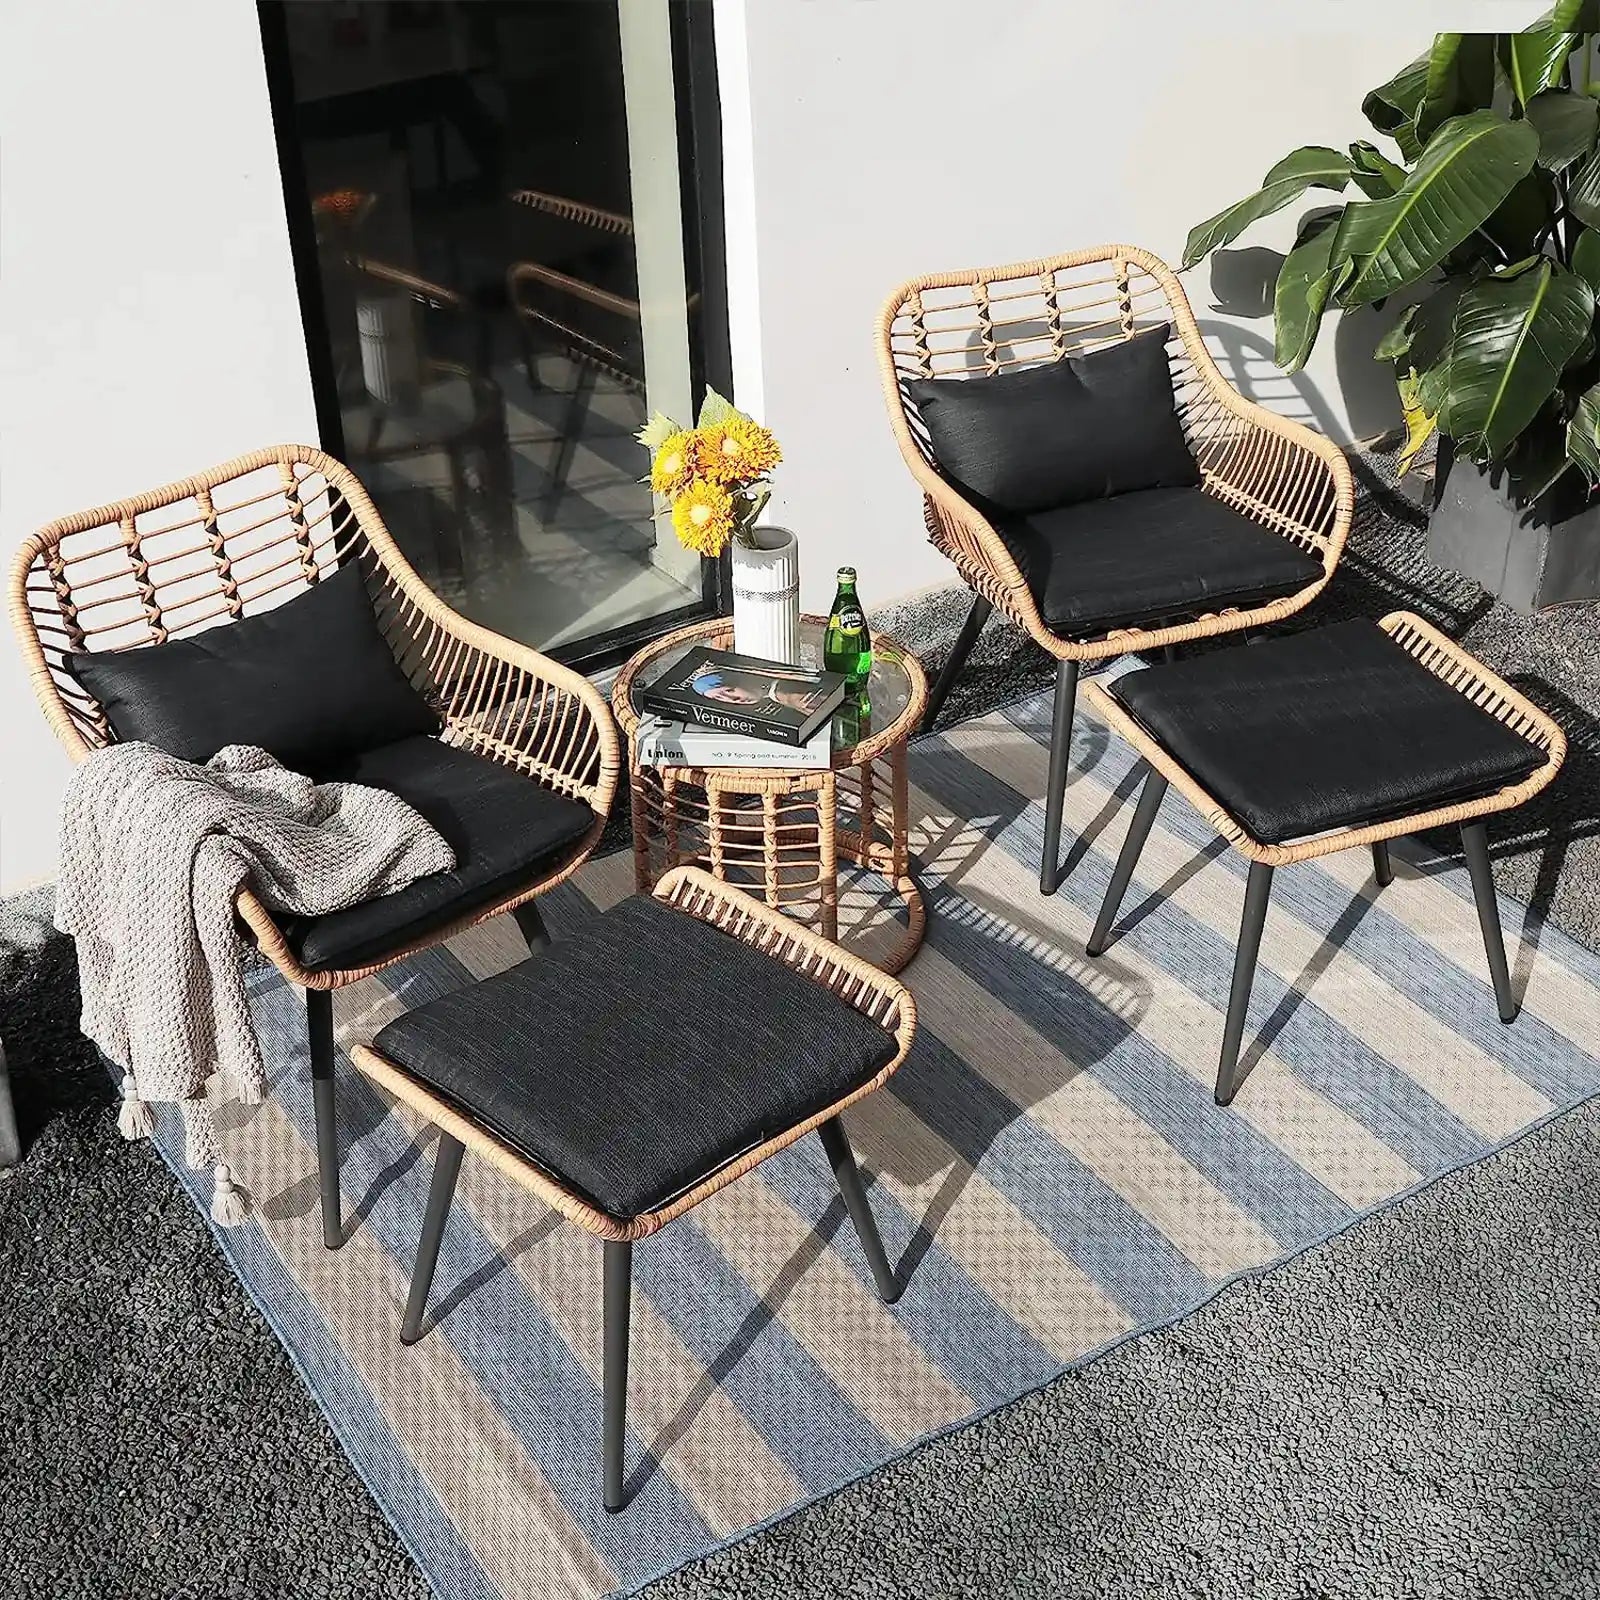 3 Piece Outdoor Wicker Furniture Bistro Set, Patio Rattan Conversation Set with Round Glass Top Coffee Side Table, Cushions for Porch, Backyard, Deck